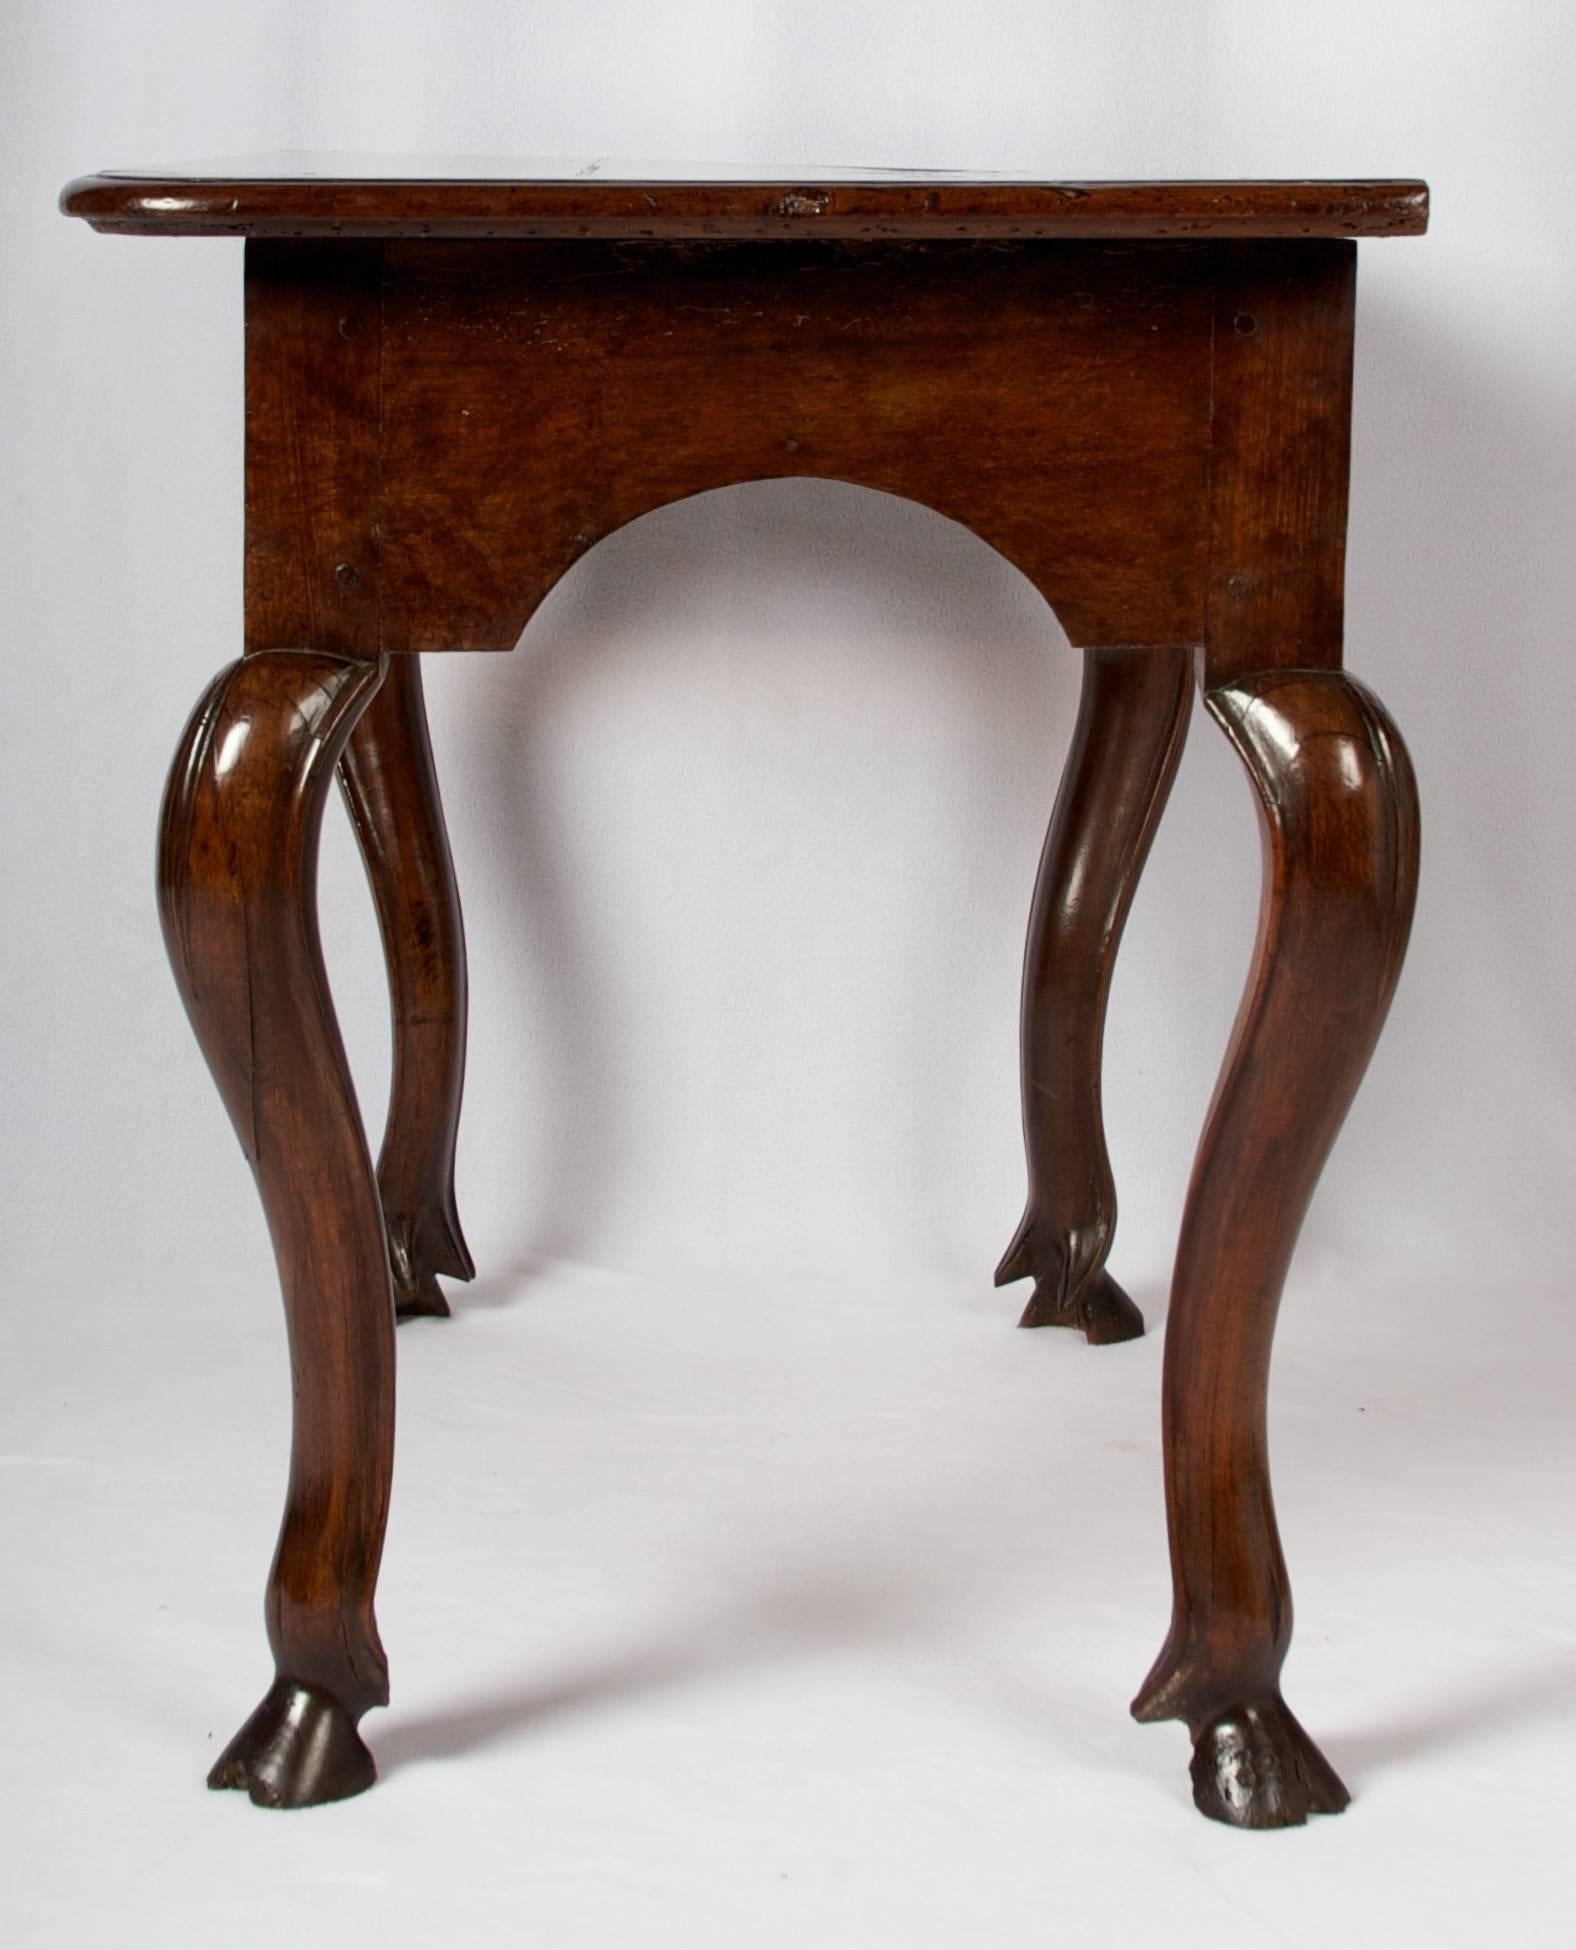 Régence Early 18th Century Regence Period Side Table with One Drawer